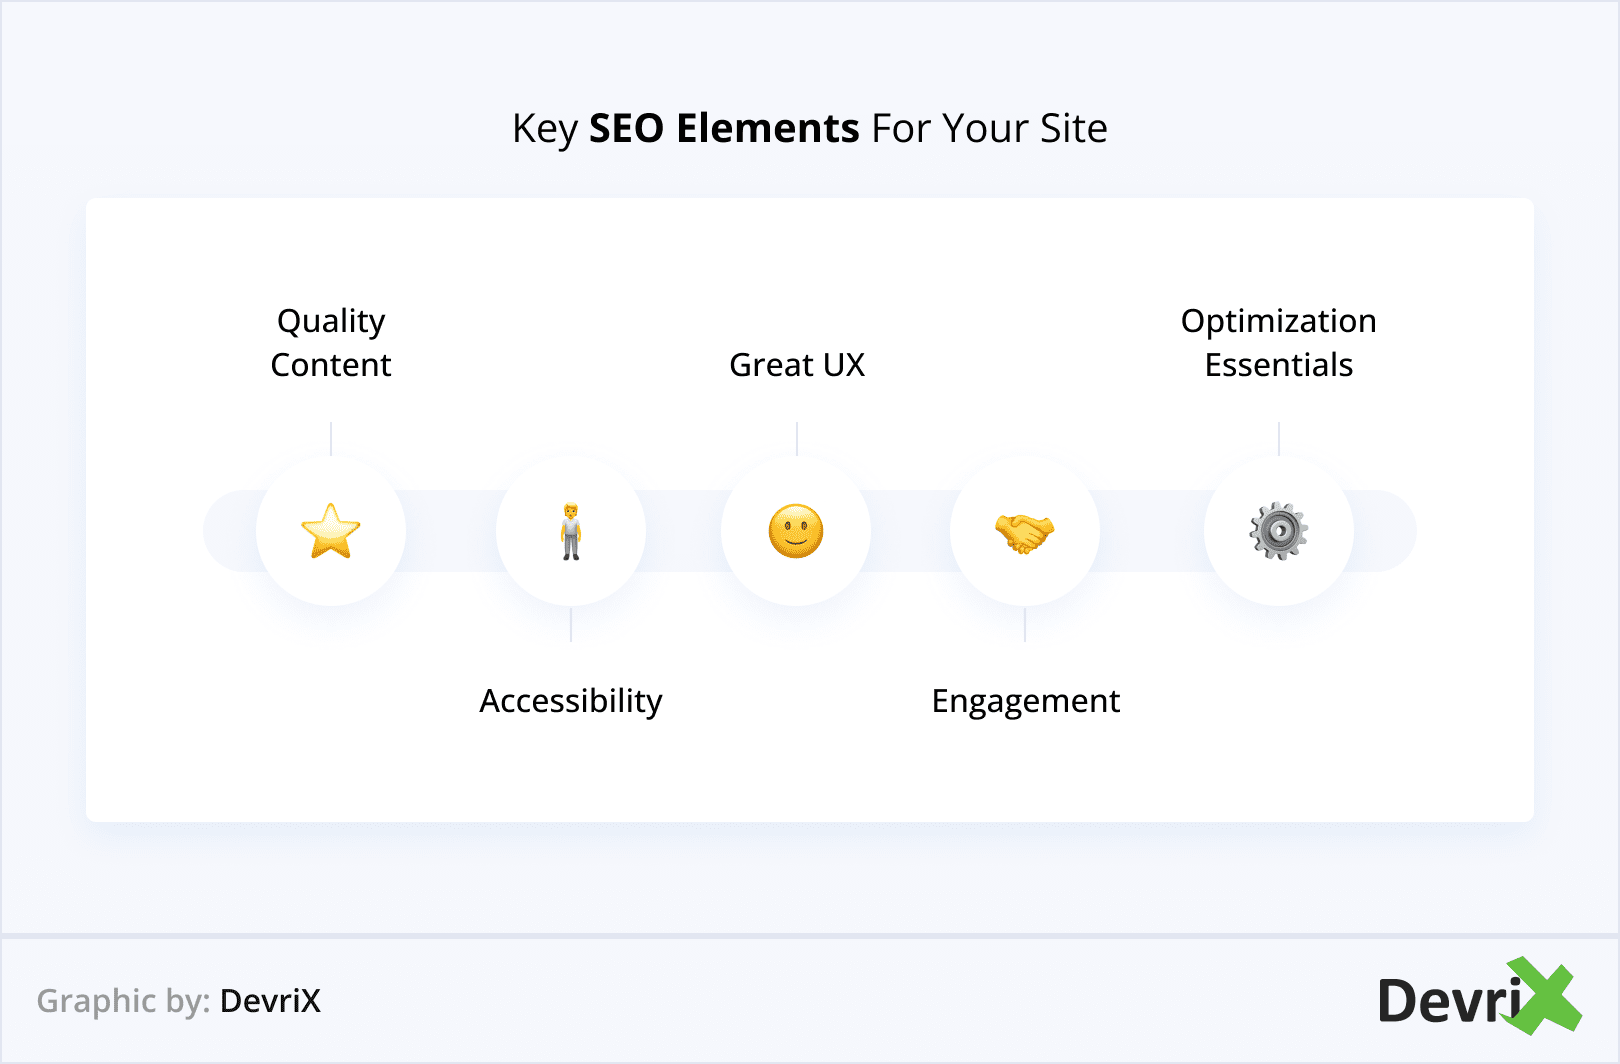 Key SEO Elements for your site